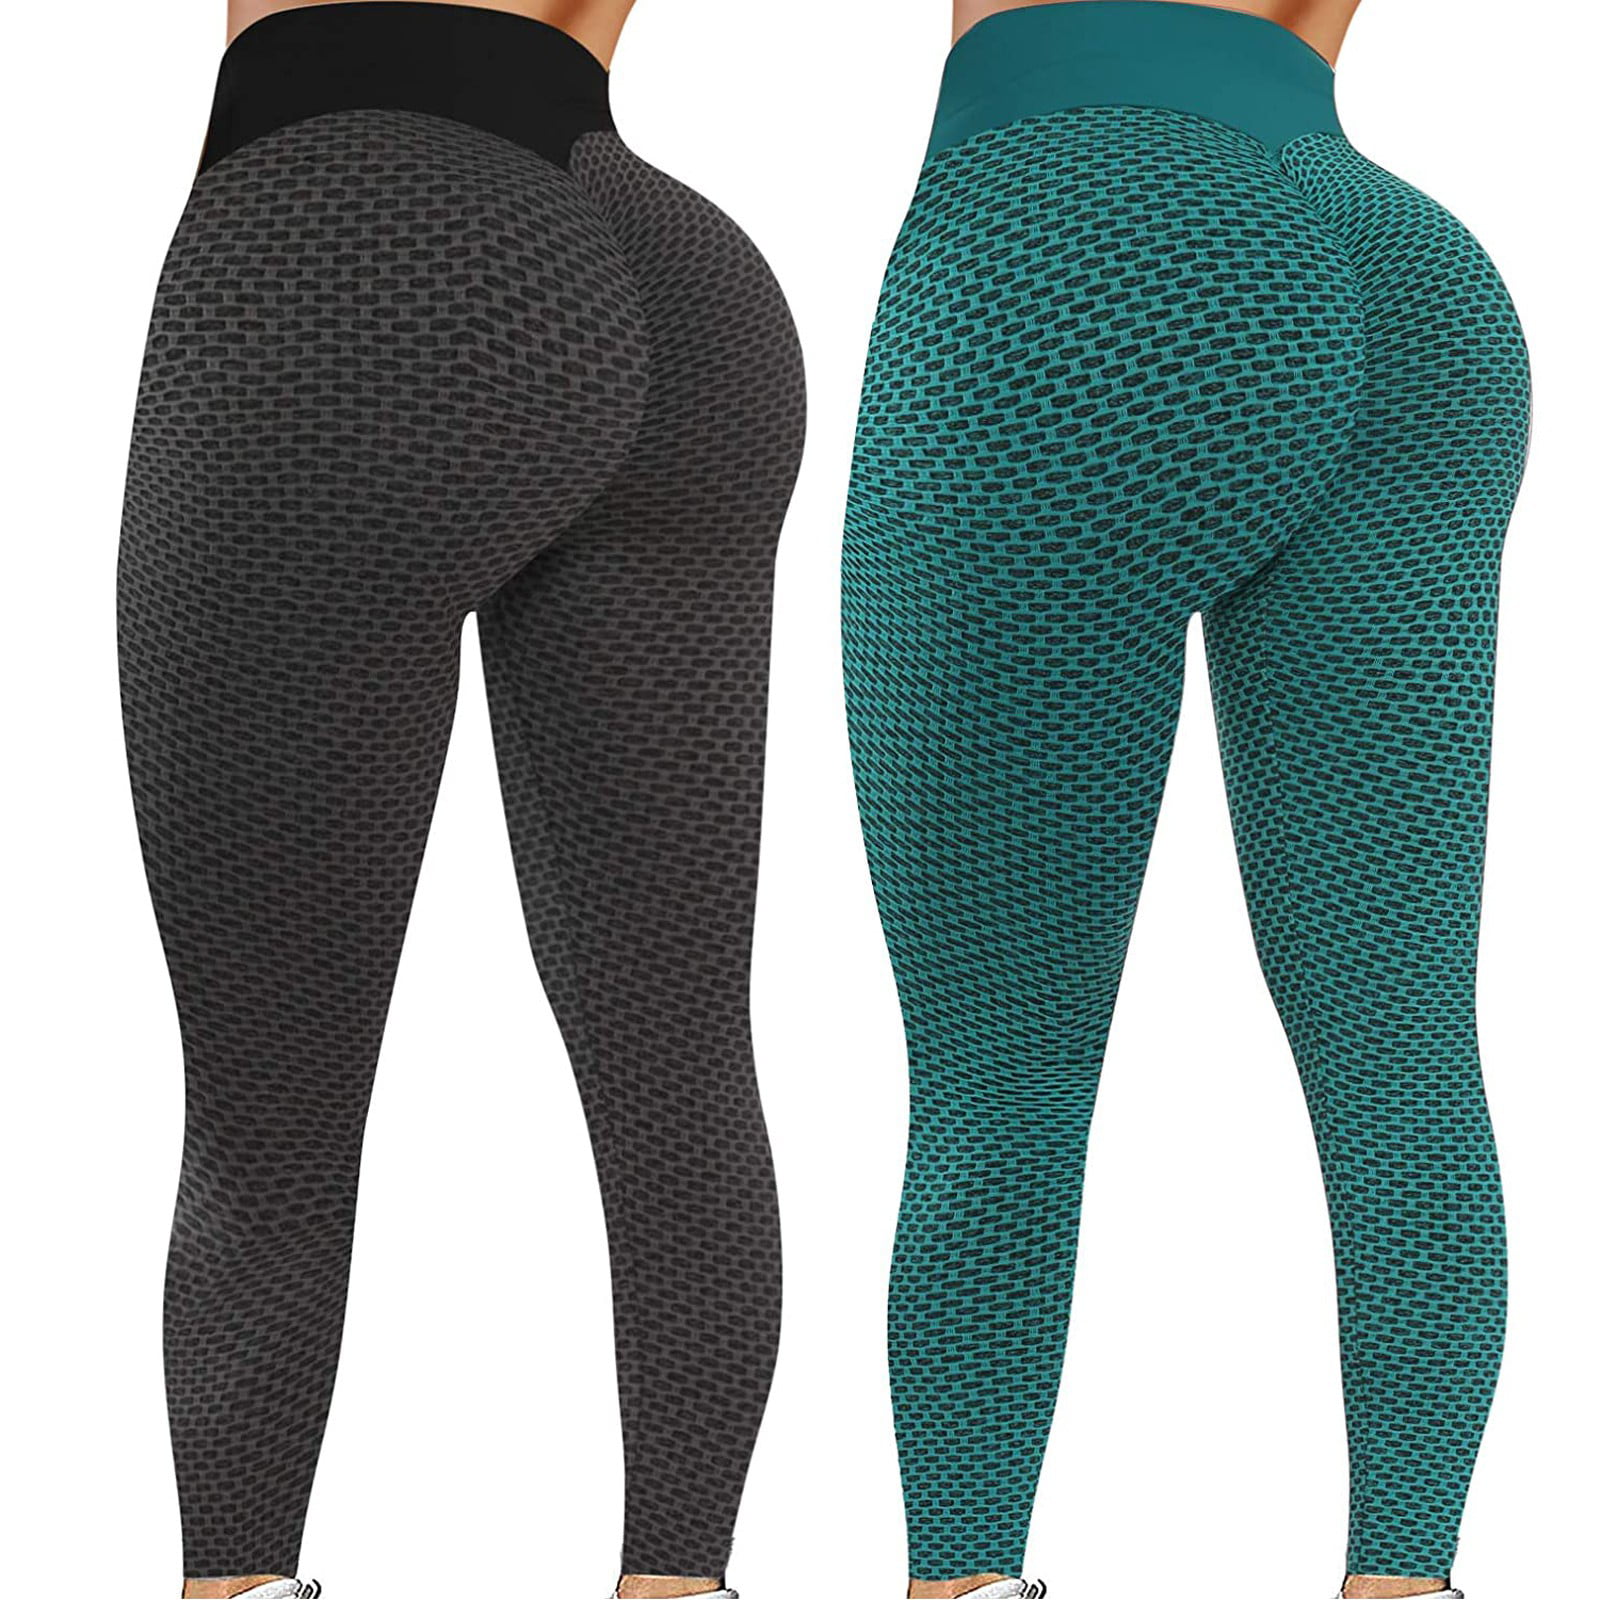 Aimik 2PC Womens High Waist Tiktok Butt Leggings Athletic Runing Yoga Pants  Solid Sweatpants Quick Dry Gym Workout Trouser Exercise Fitnesss -  Walmart.com